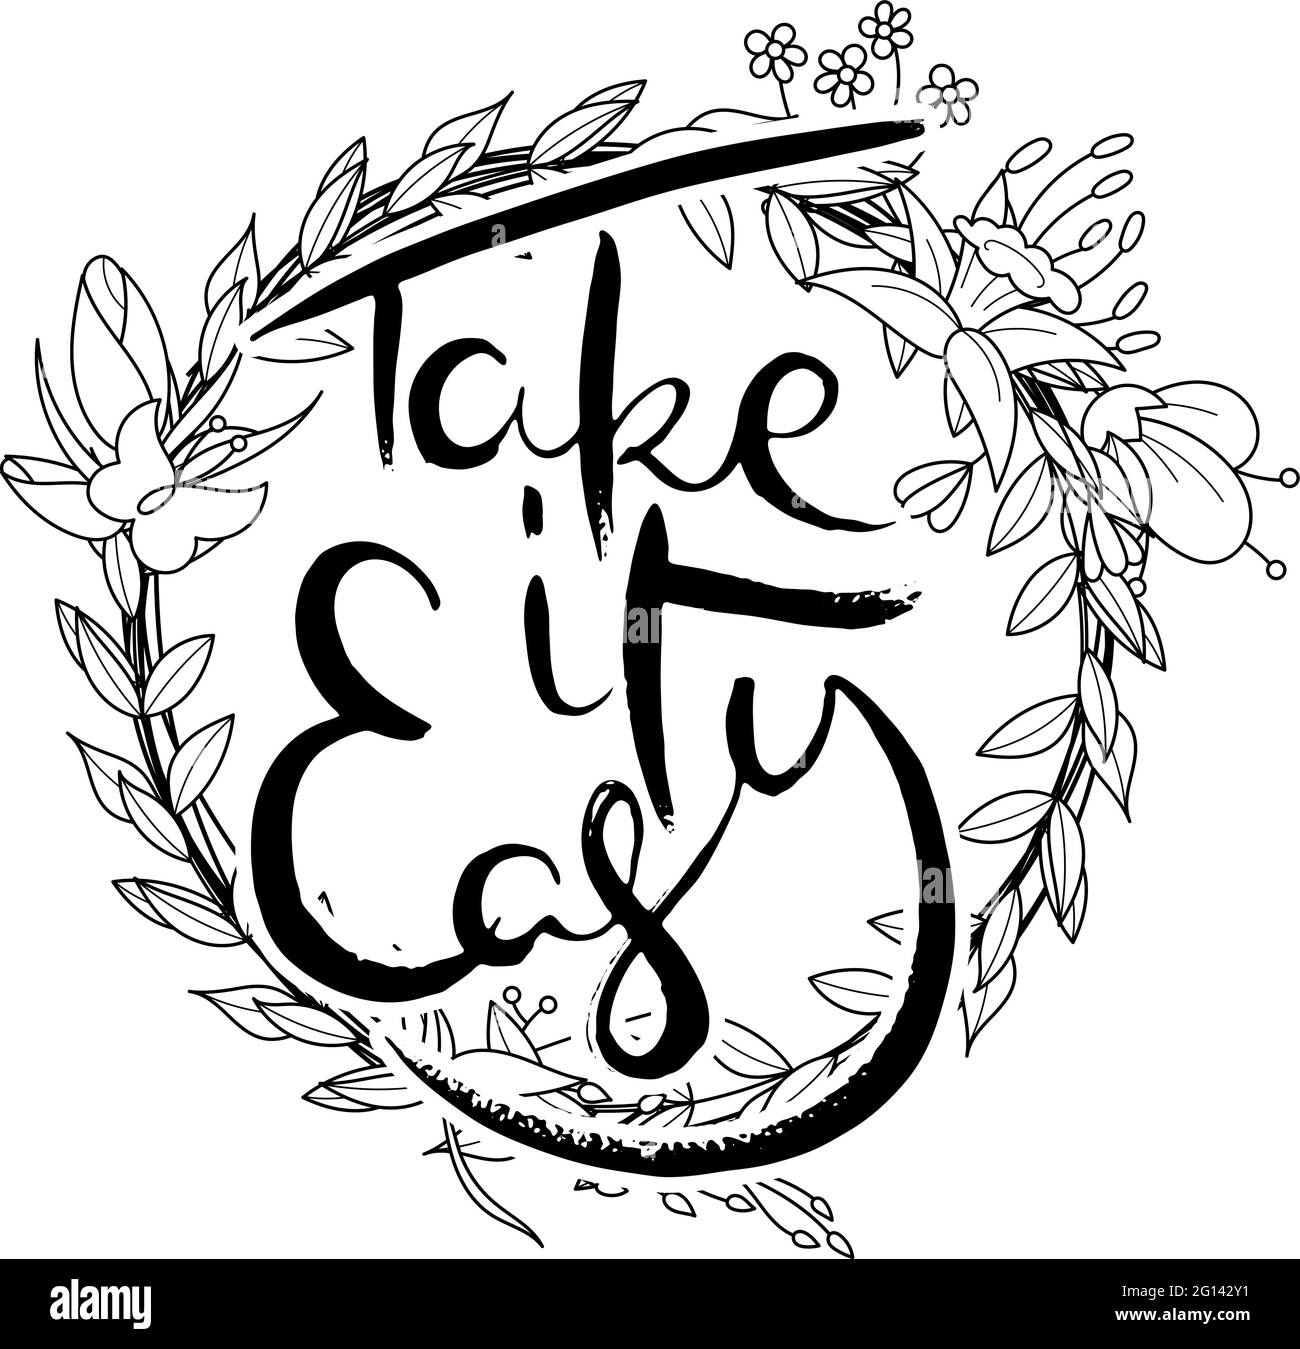 Take it Easy. Hand lettering grunge card with flower background. Handcrafted doodle letters in retro style. Hand-drawn vintage vector typography illus Stock Vector